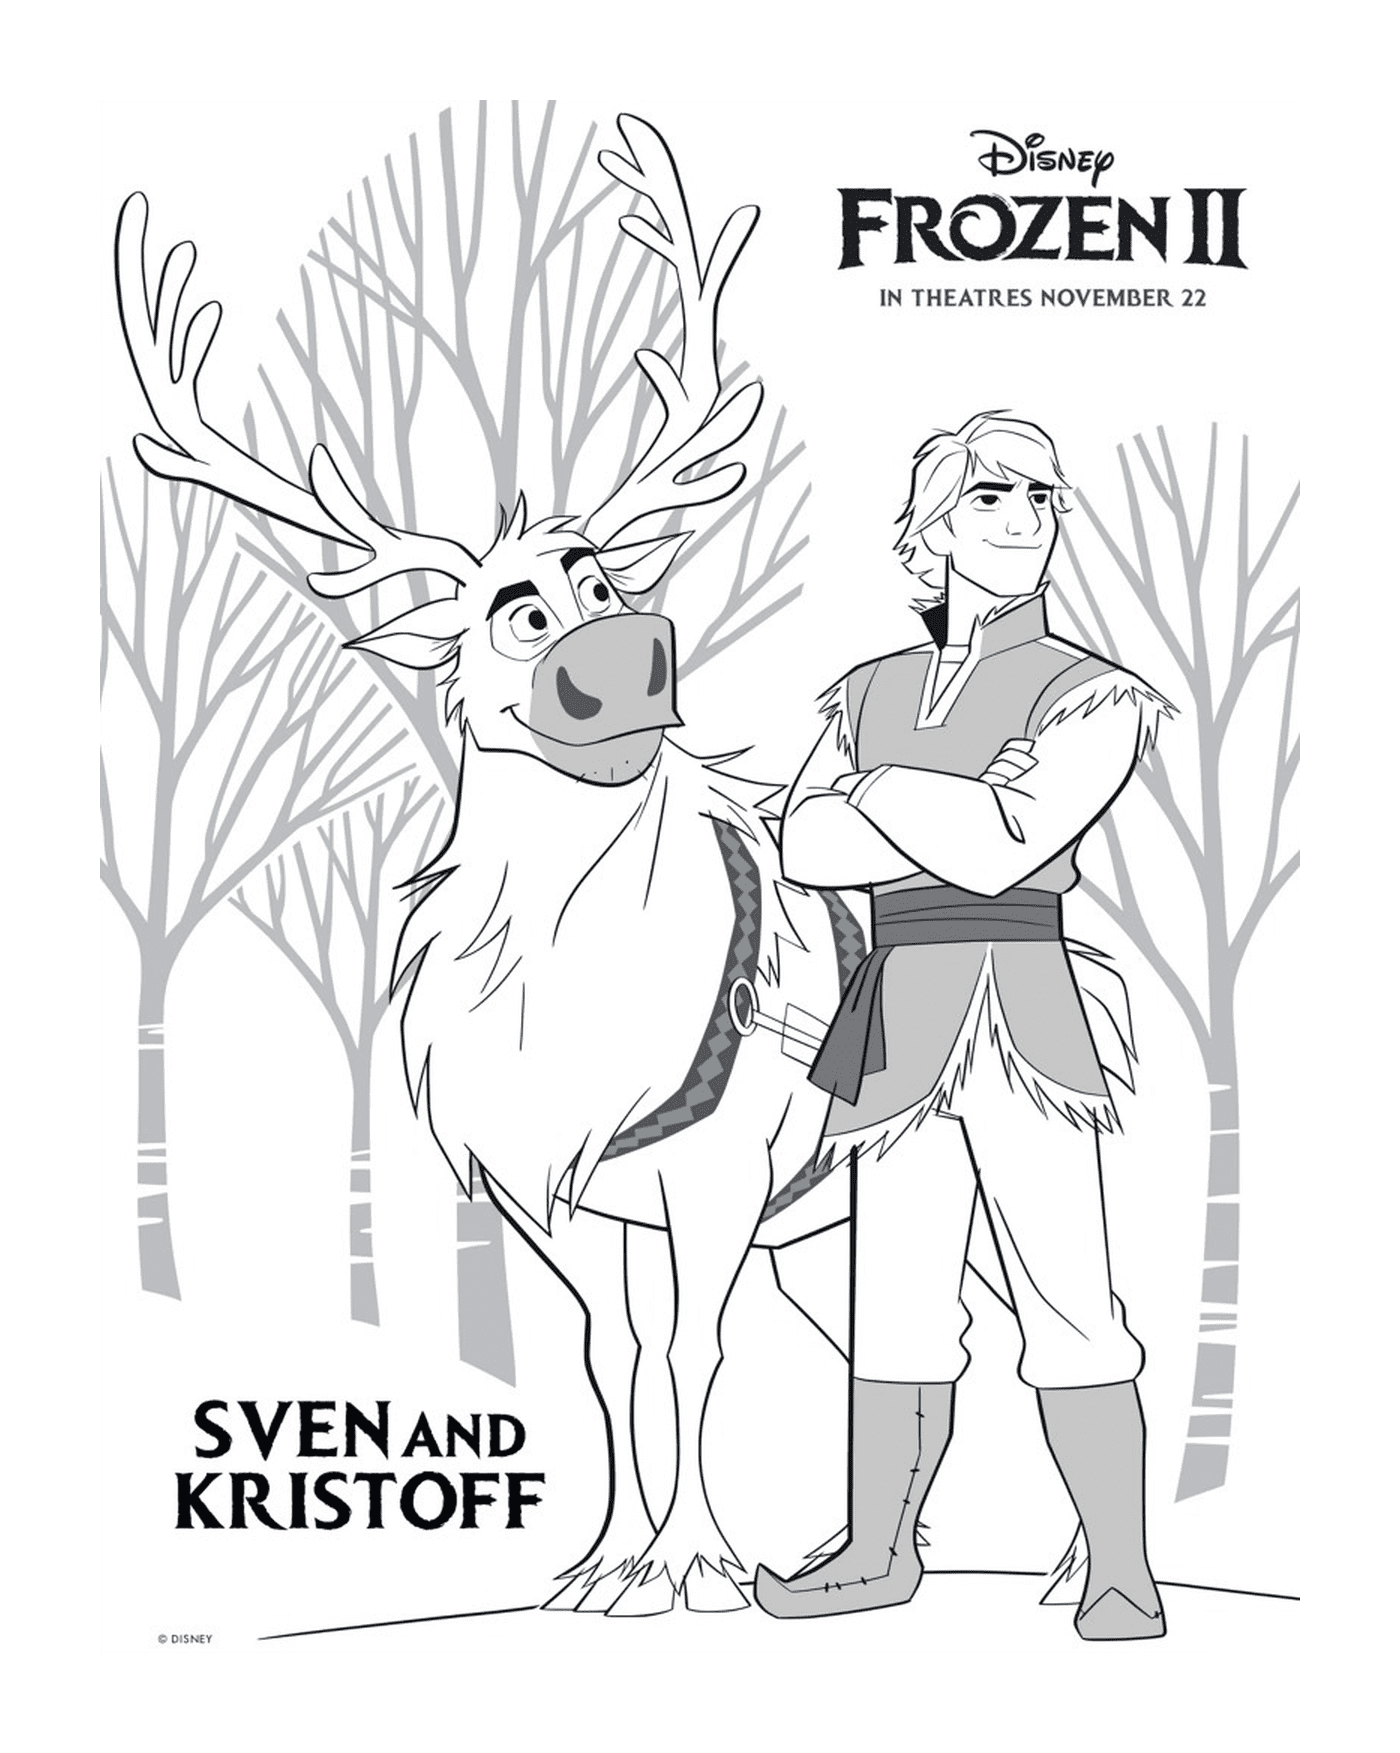  Sven and Kristoff back in The Snow Queen 2 